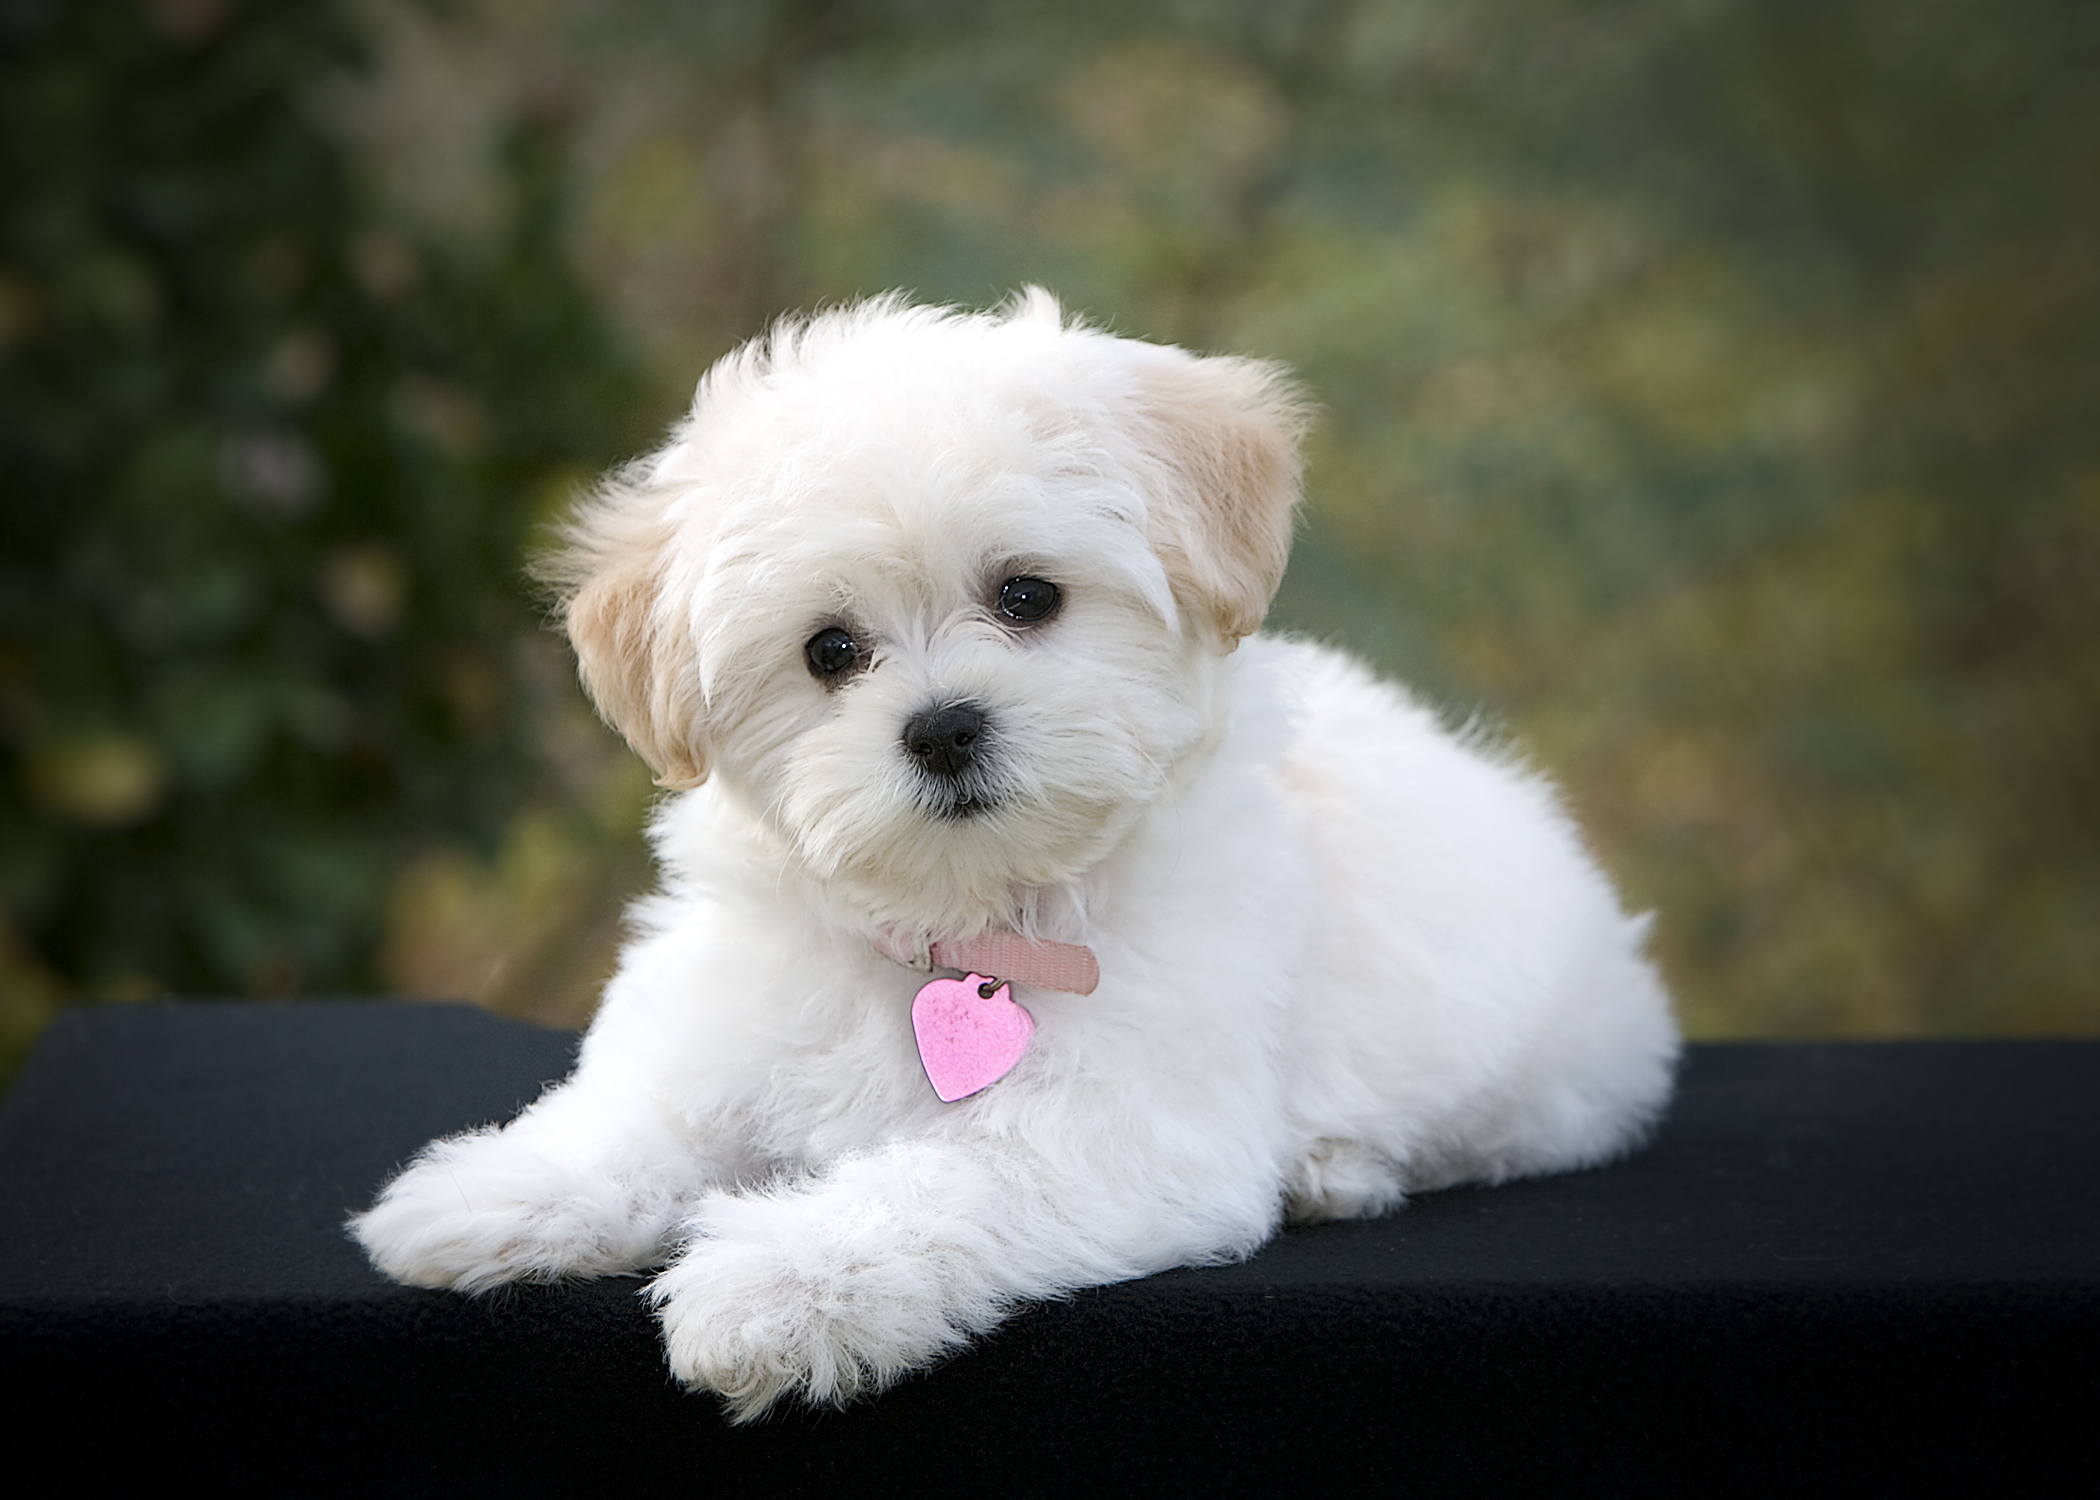 Small Dogs for Sale - Small Dog Breeds for Sale | VIP Puppies